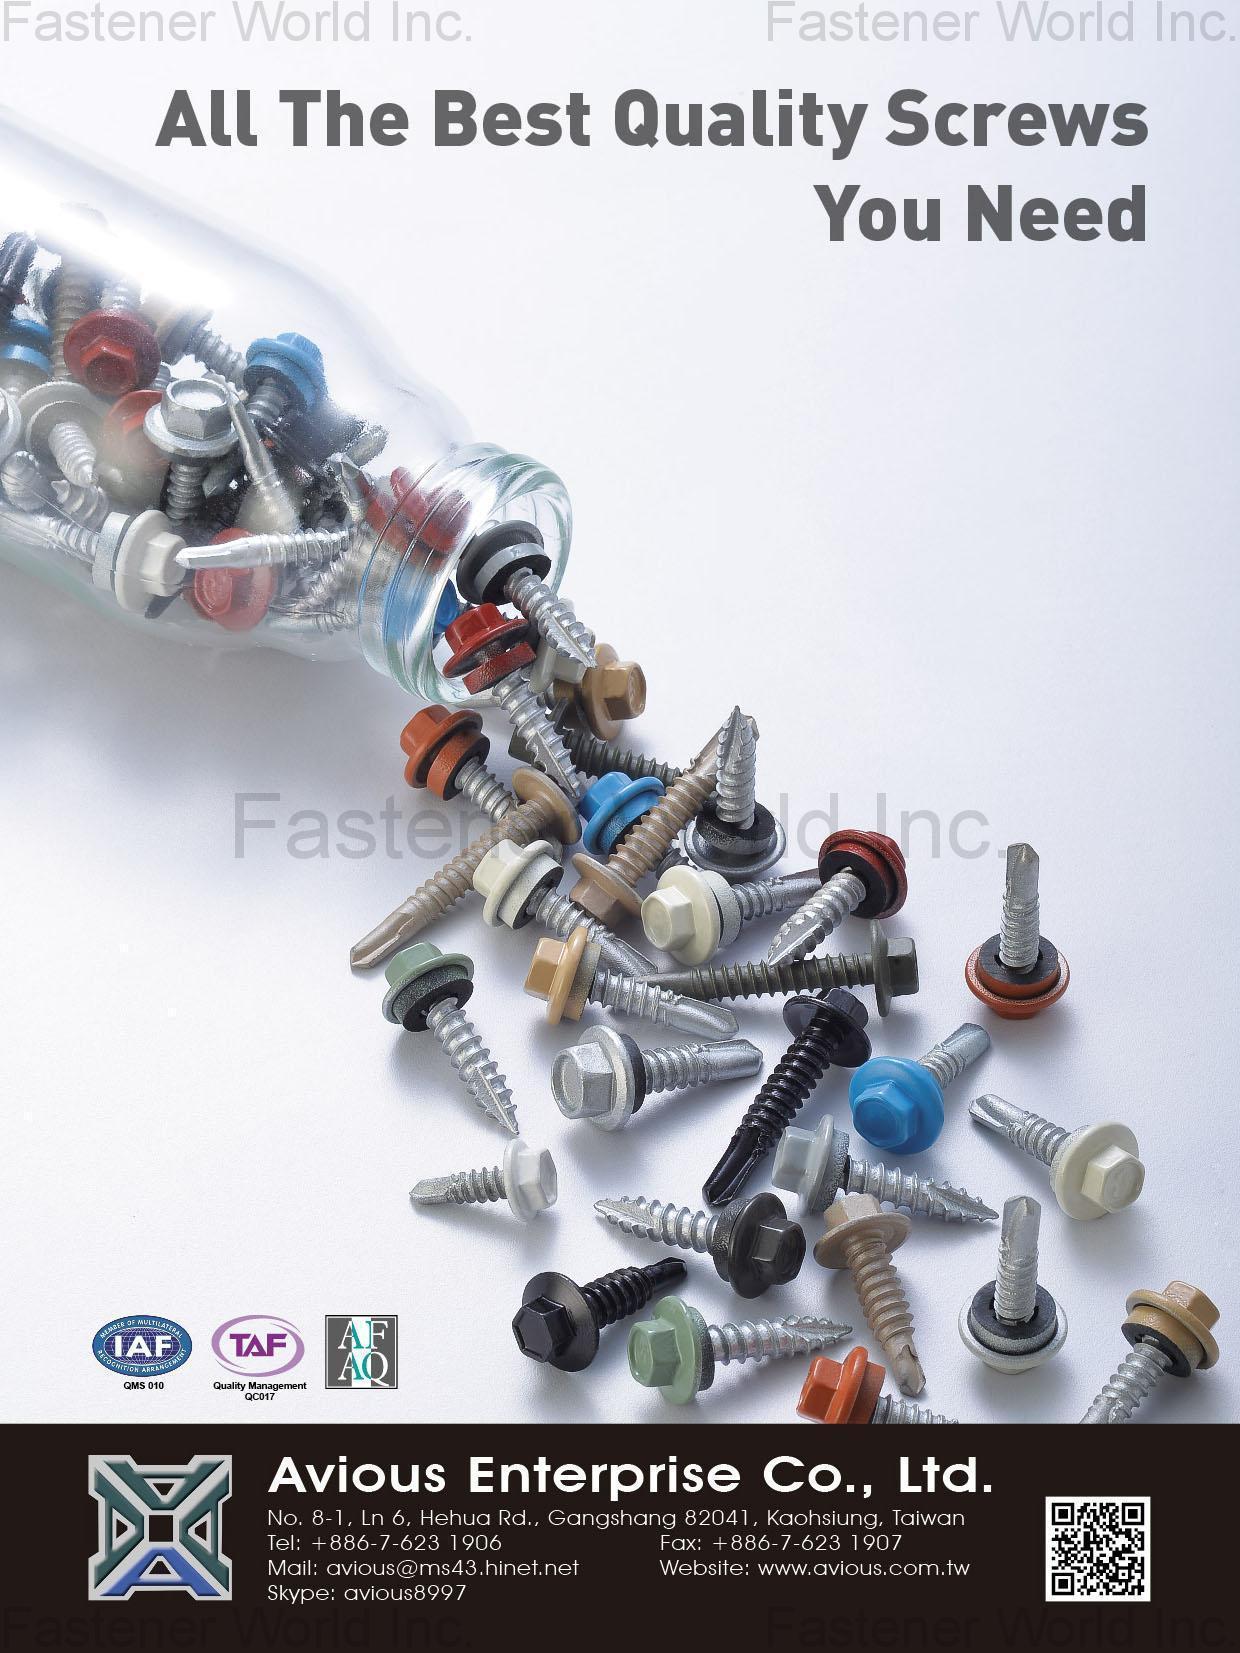 AVIOUS ENTERPRISE CO., LTD. , CONE SEAT BOLT, BALL SEAT BOLT, HEX HEAD CONE SEAT BOLT, TORX DRIVE BOLT, FLANGE 12 POINT BOLT, SOCKET BOLT, STUD, TRUCK BOLT, MACHINE SCREW, SEMS Screw, SELF-TAPPING SCREW, SELF-DRILLING SCREW, THREAD-CUTTING SCREW, SELF-DRILLING SCREW WITH WINGS, Collated Screw, SPECIAL SCREW, NYLON PATCH, HIGH PERFORMANCE, WHEEL NUTS, SPECIAL NUTS, STANDARD NUTS, WASHERS